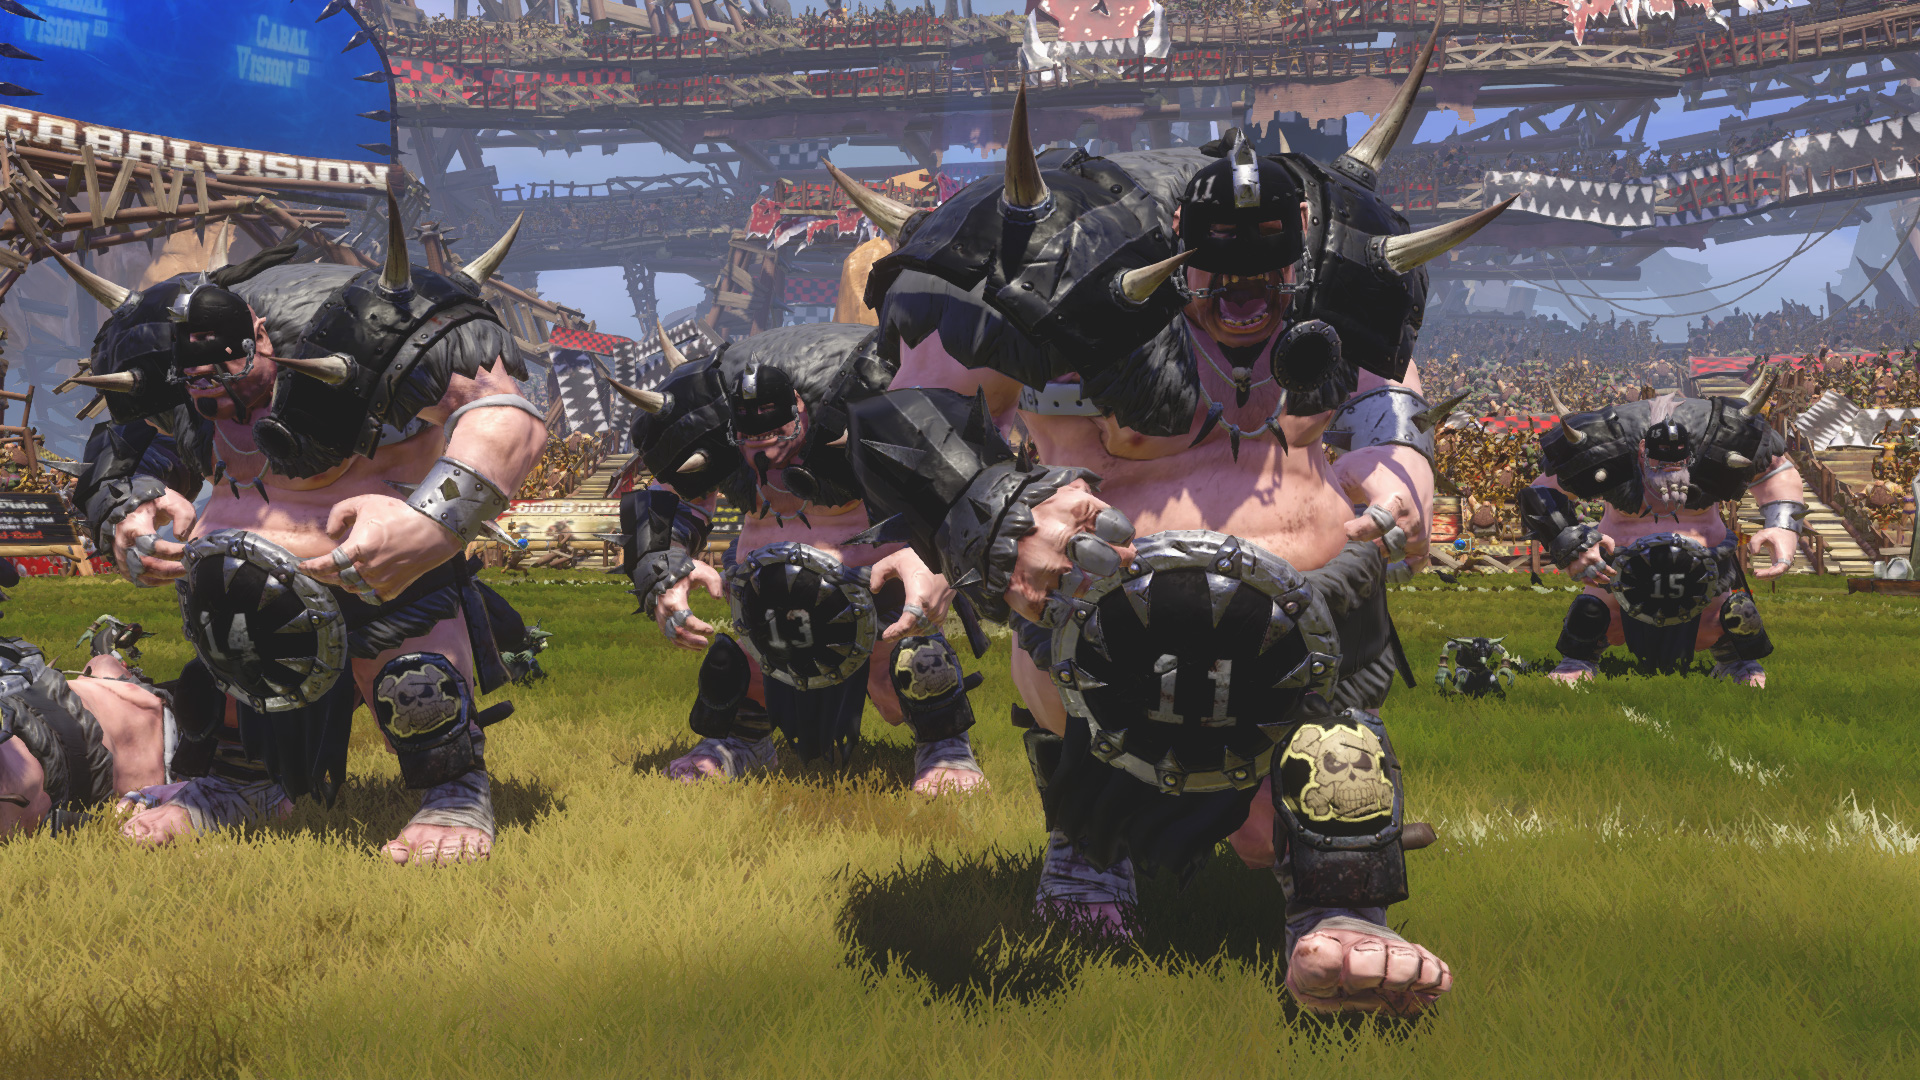 Blood Bowl 2 - Official Expansion on Steam